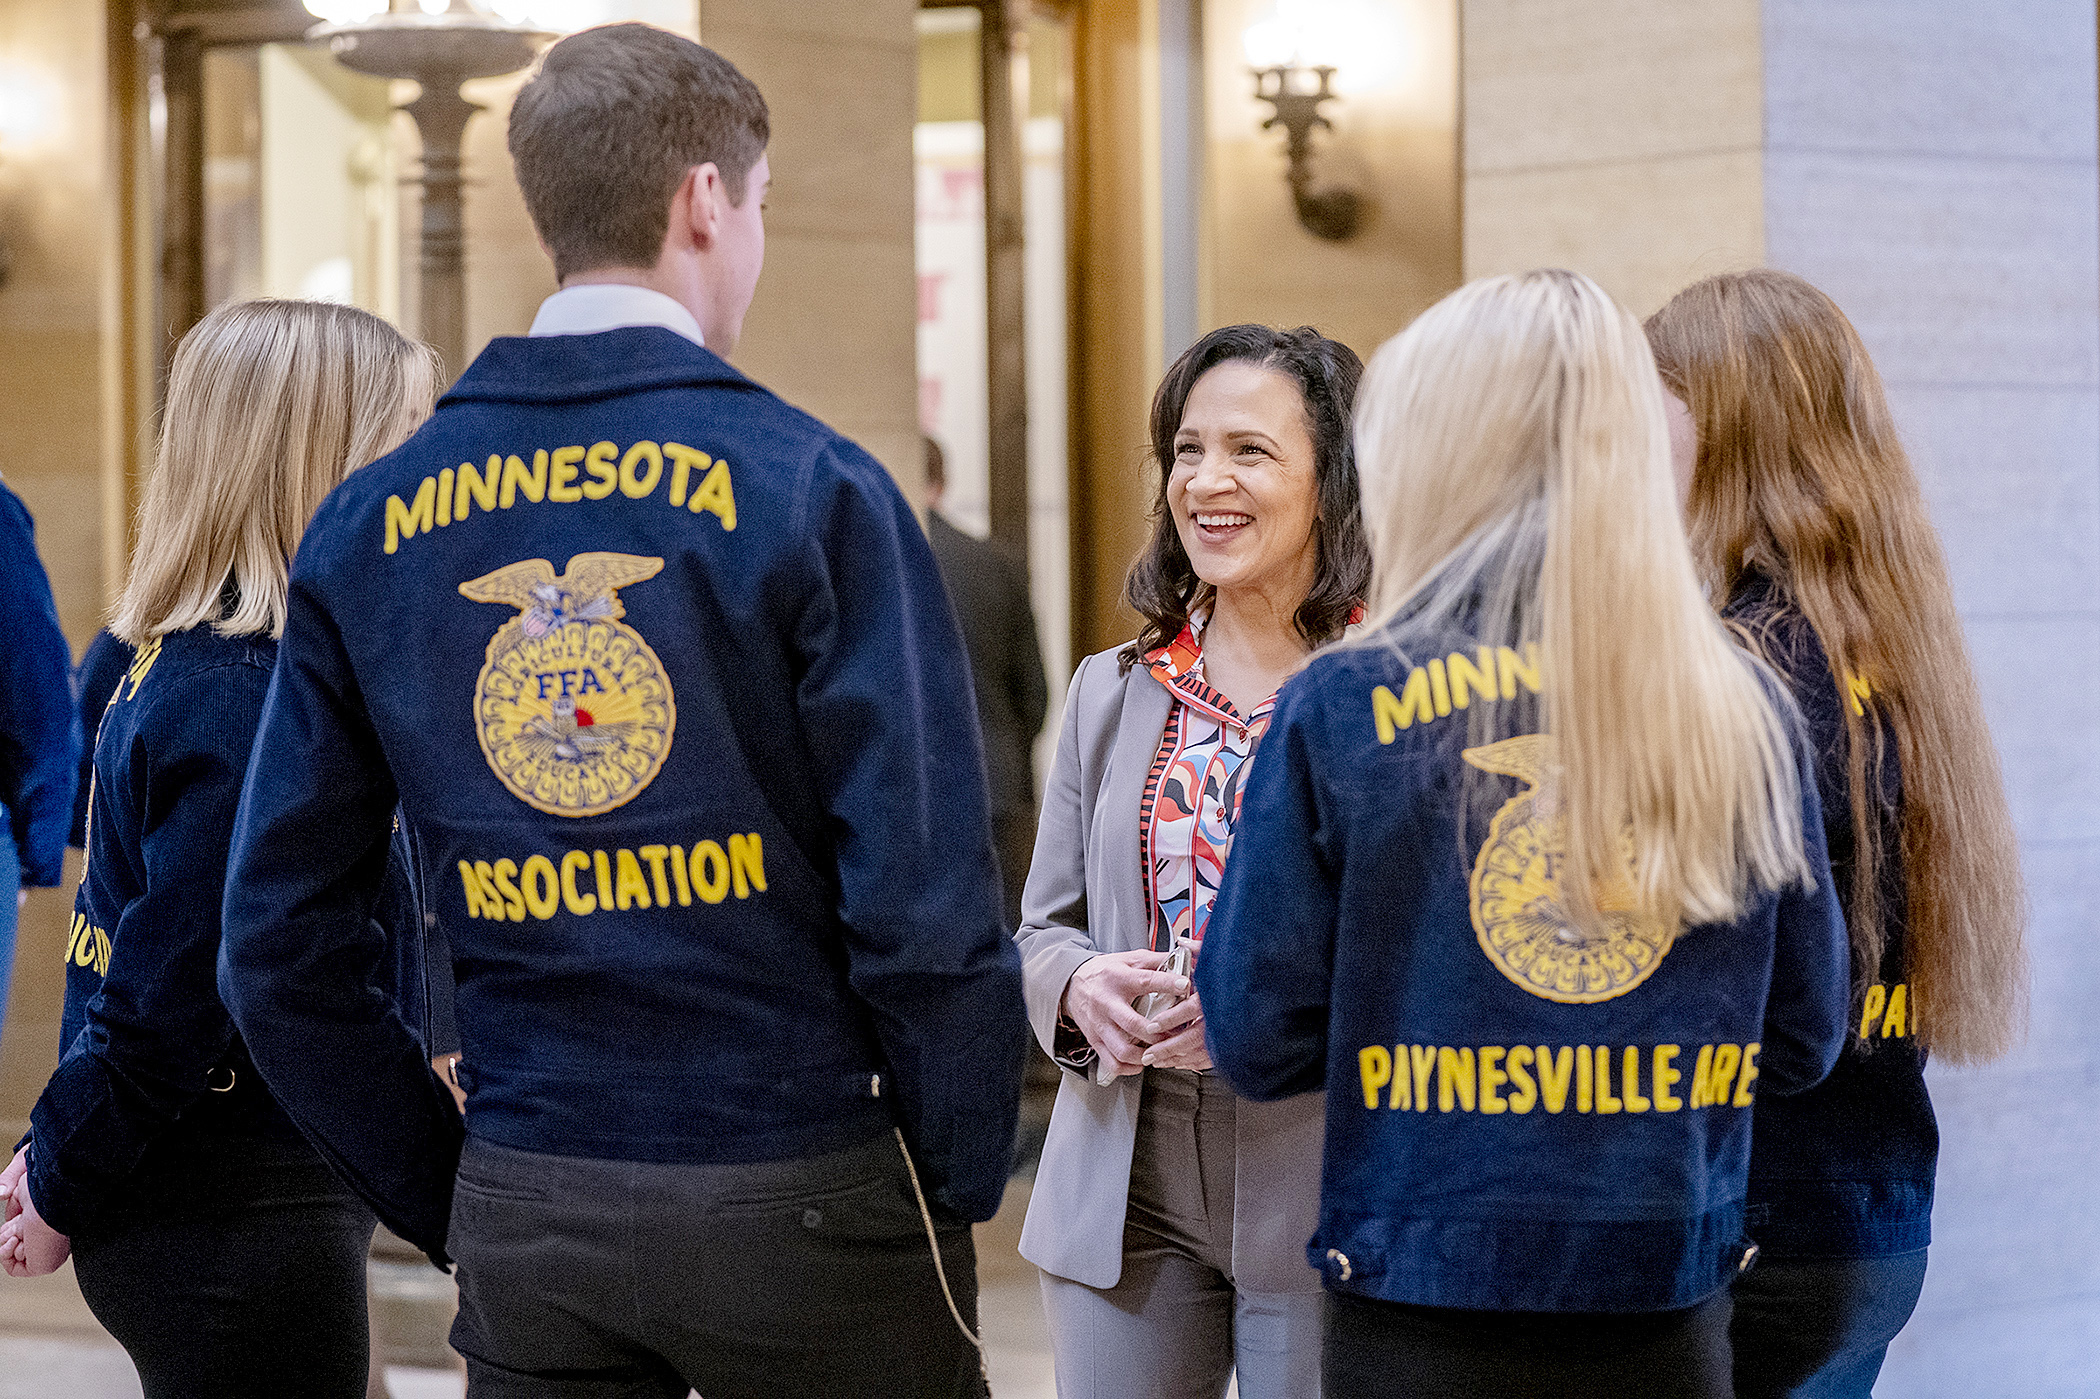 House Minority Leader Lisa Demuth speaks with a group of Minnesota FFA Association members visiting the State Capitol Feb. 26. The group participated in the FFA's Agricultural Policy Experience. (Photo by Michele Jokinen)